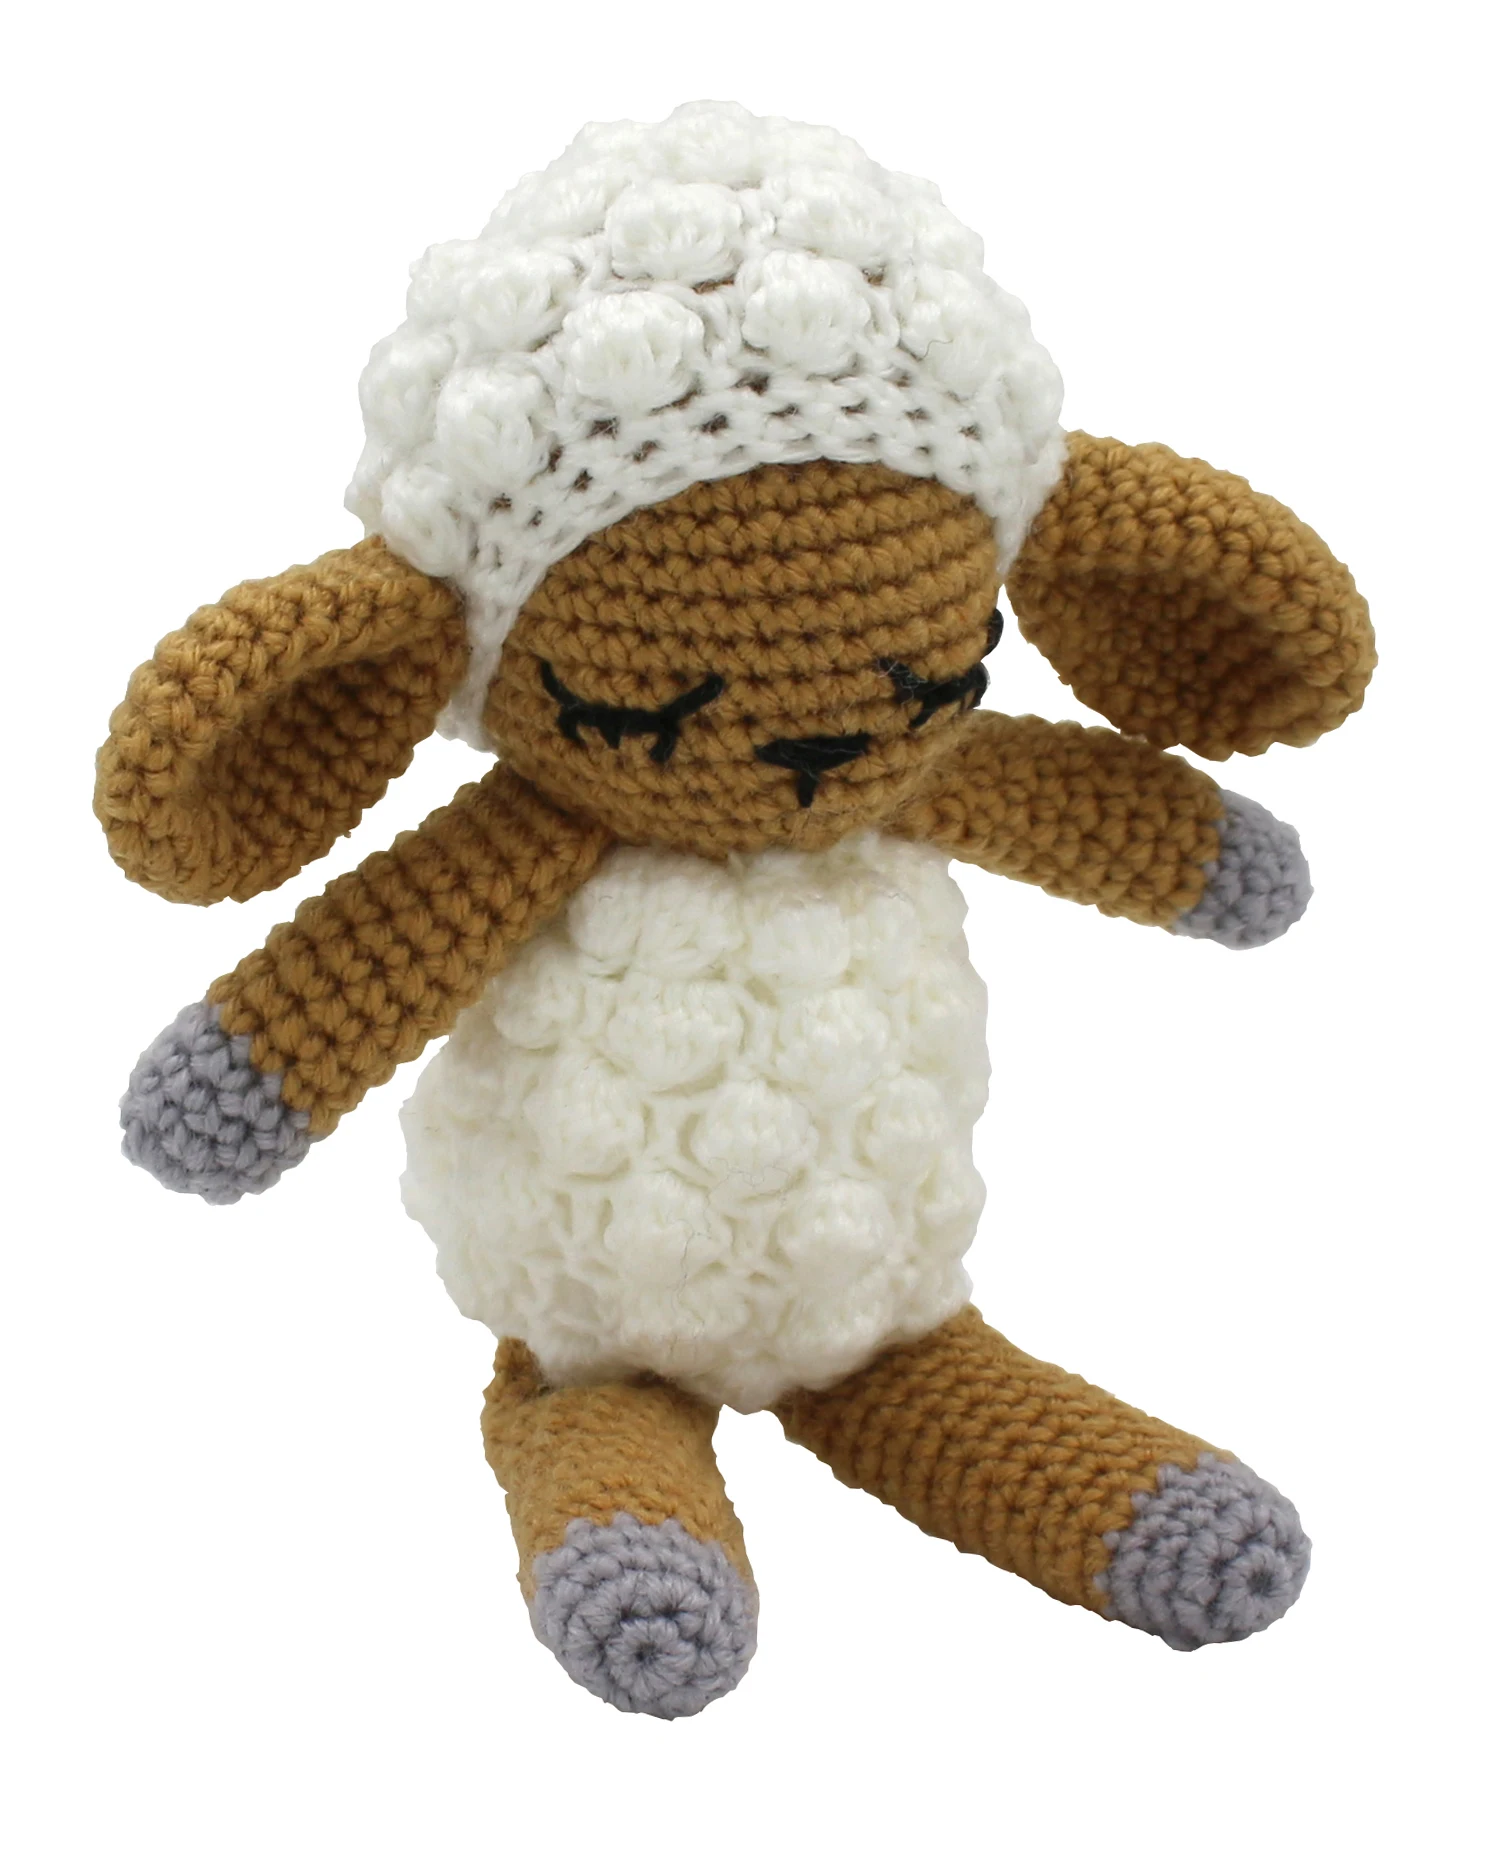 The Cute Animal Sheep Gift  hand knitting toy for children (1600071016976)